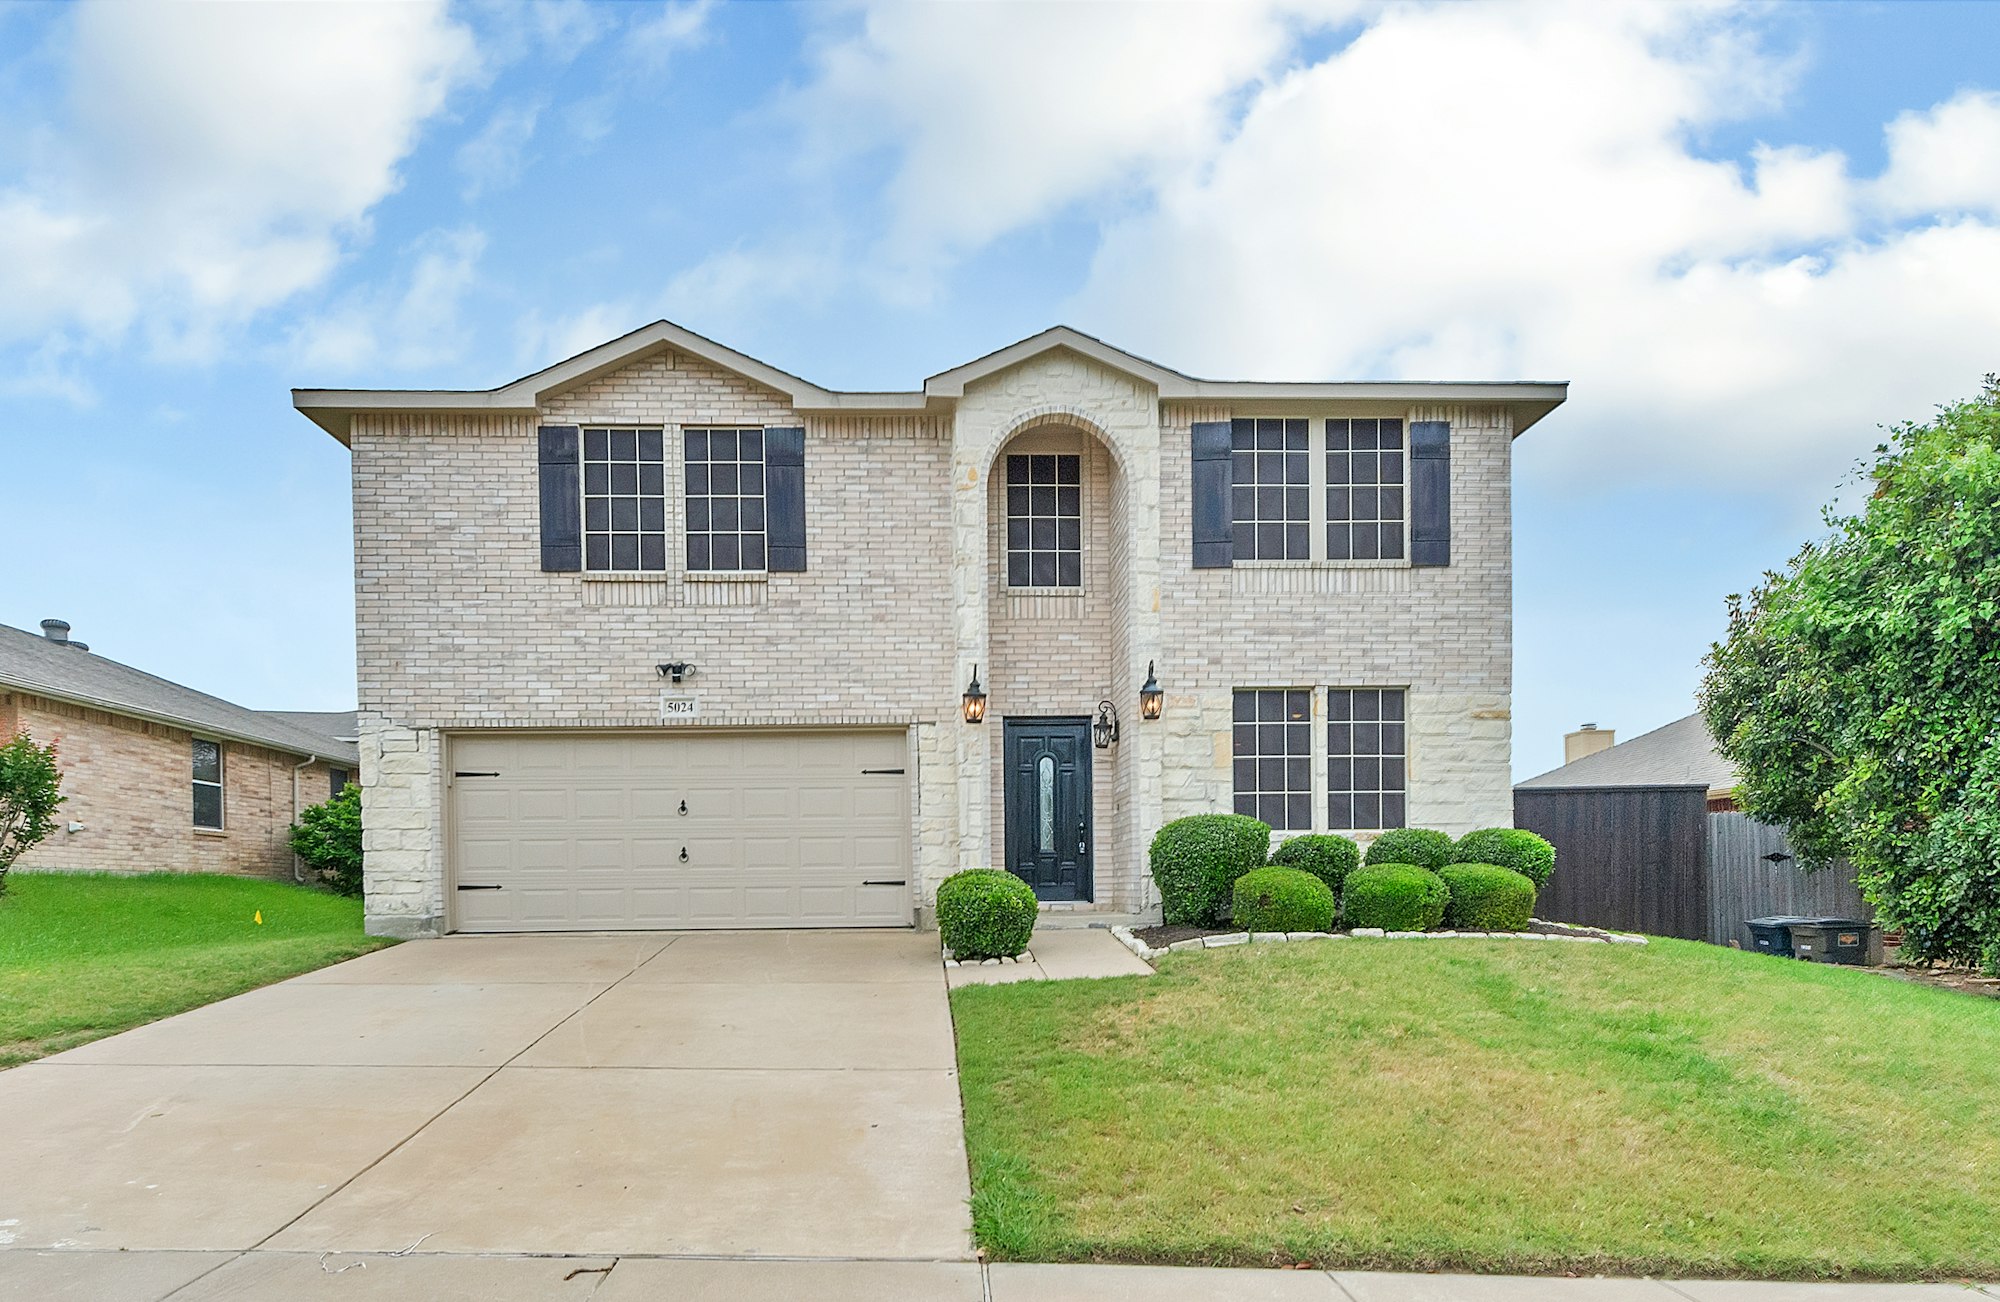 Photo 1 of 27 - 5024 Prestwick Dr, Fort Worth, TX 76135